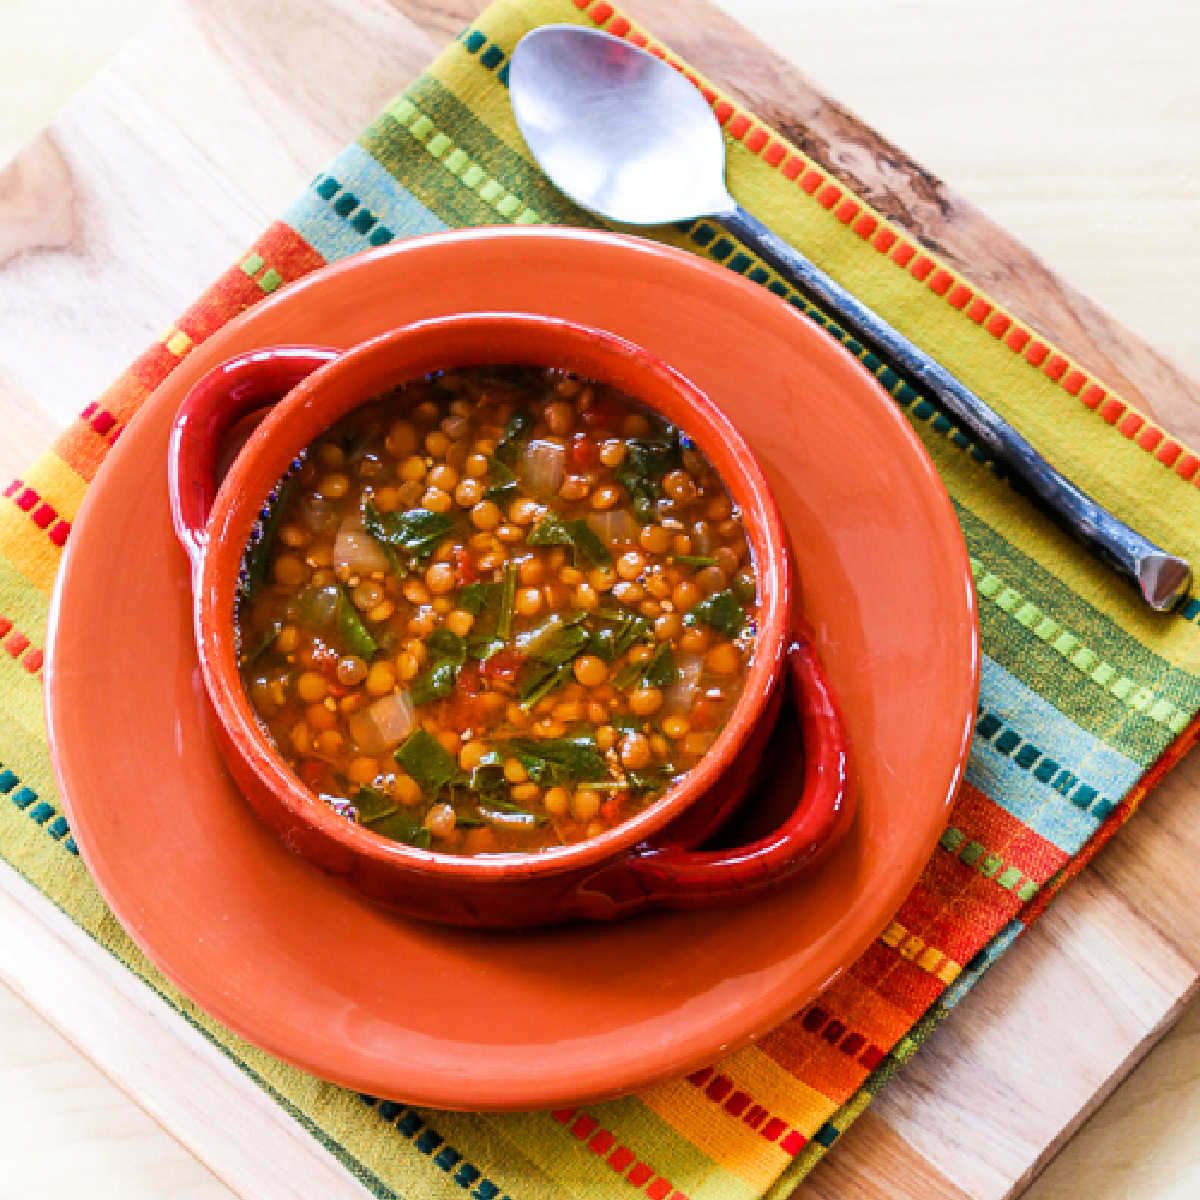 Square image of Vegetarian Lentil Soup with Spinach shown in bowl on orange plate.